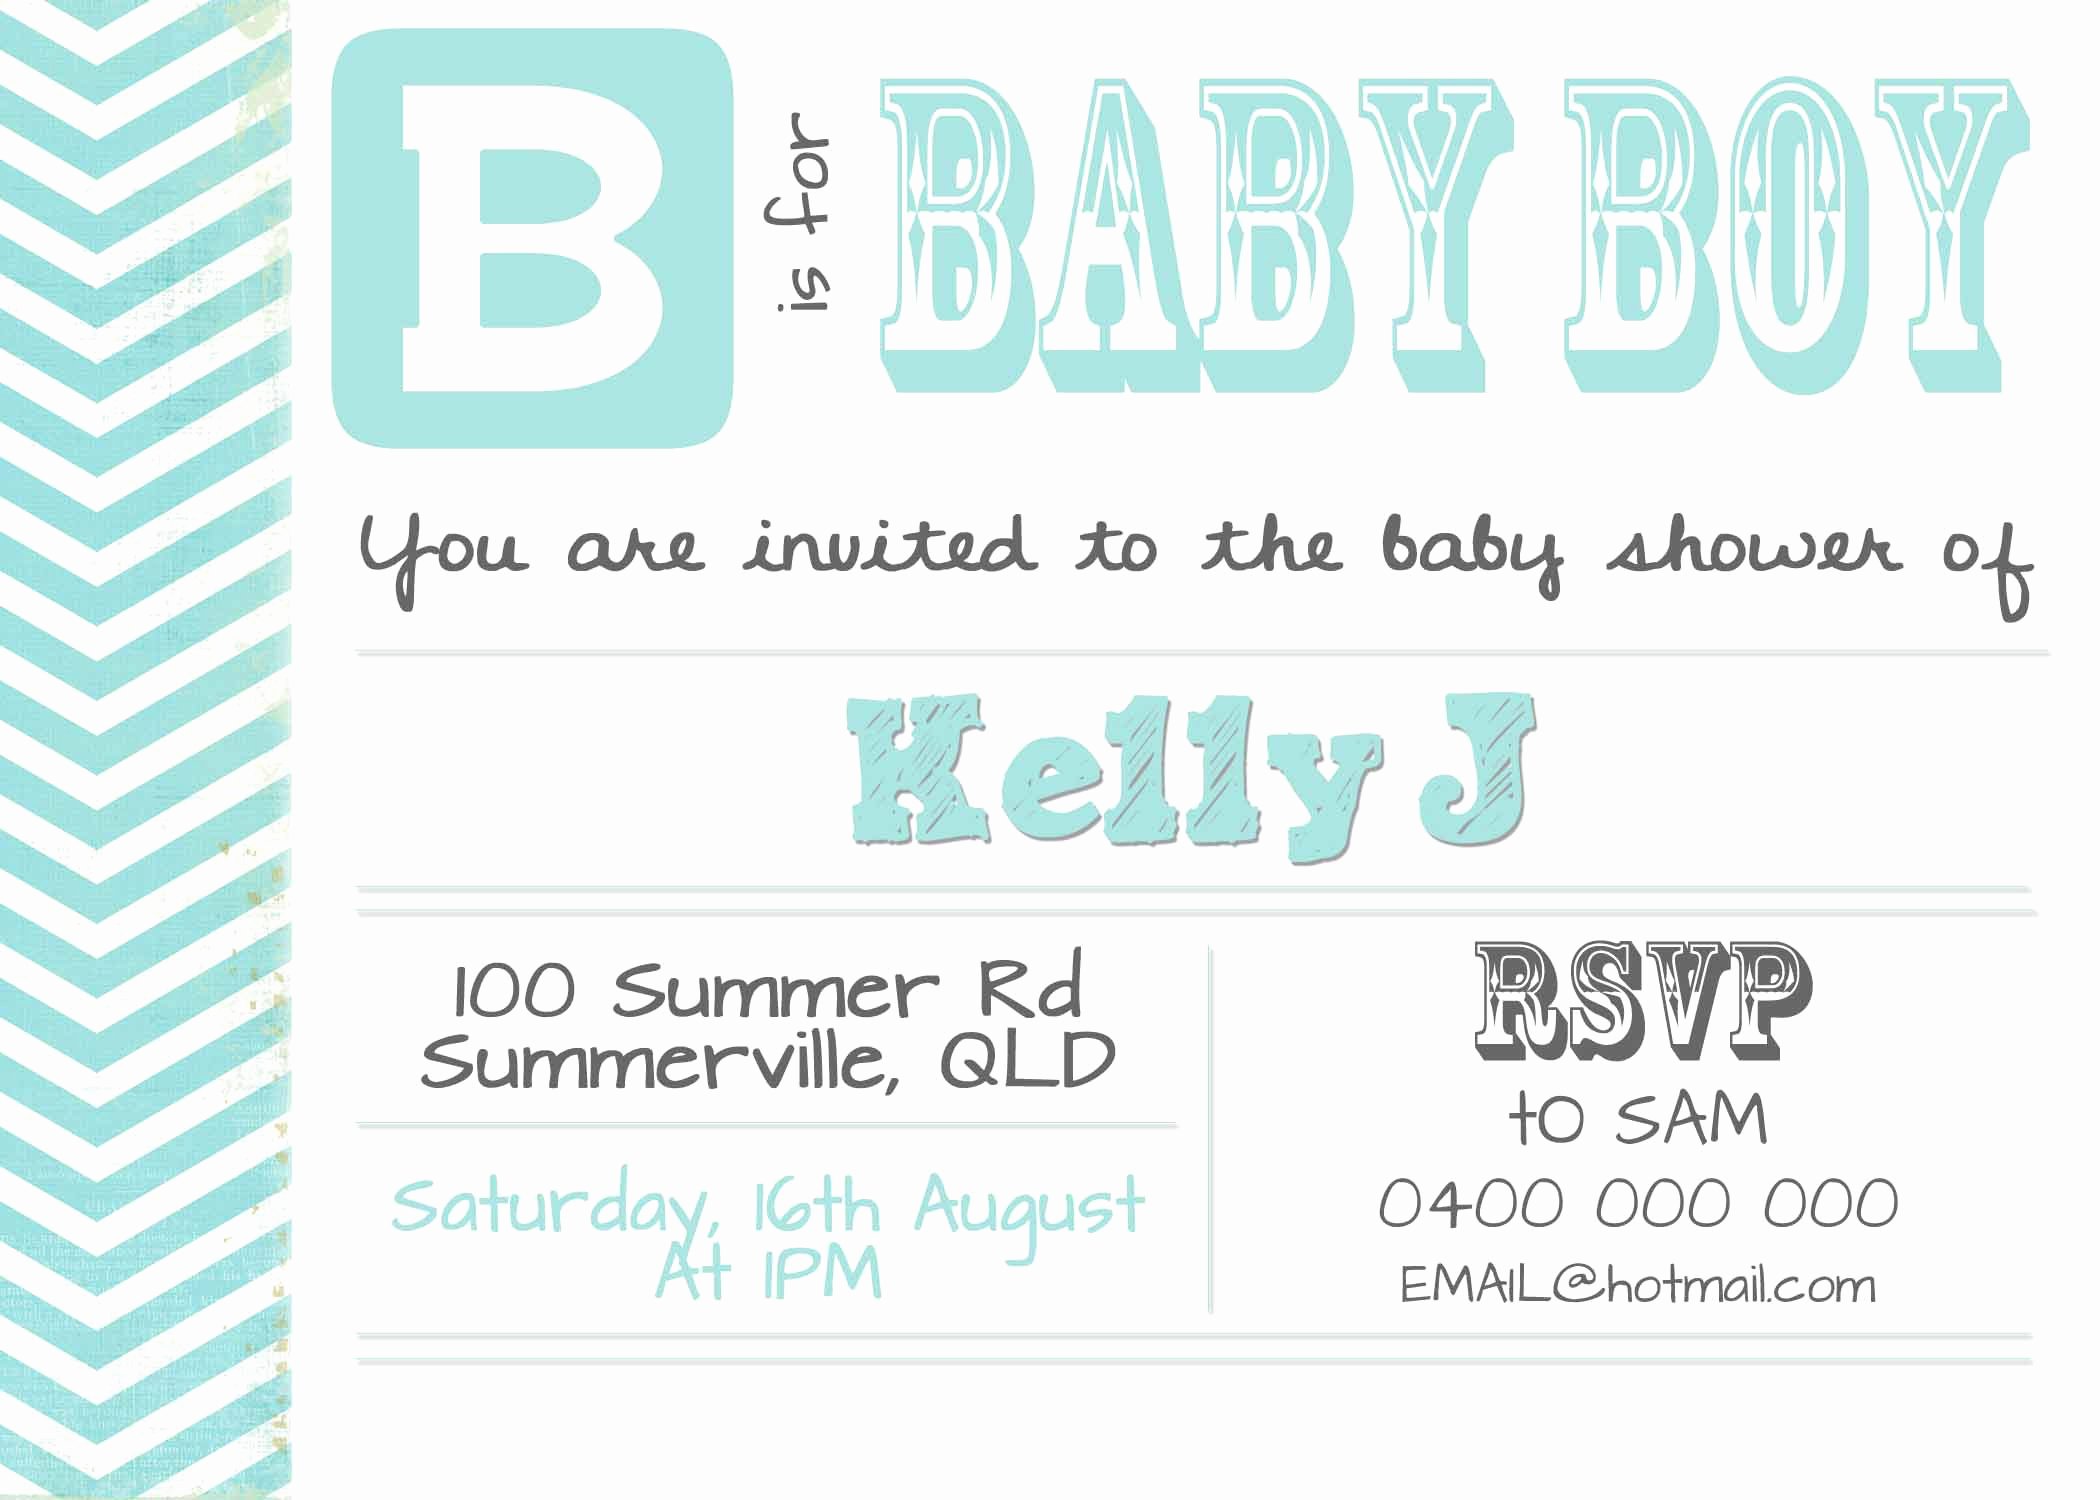 Sample Baby Shower Invitations Awesome Diy Digital Baby Shower Invitation Simplify Create Inspire